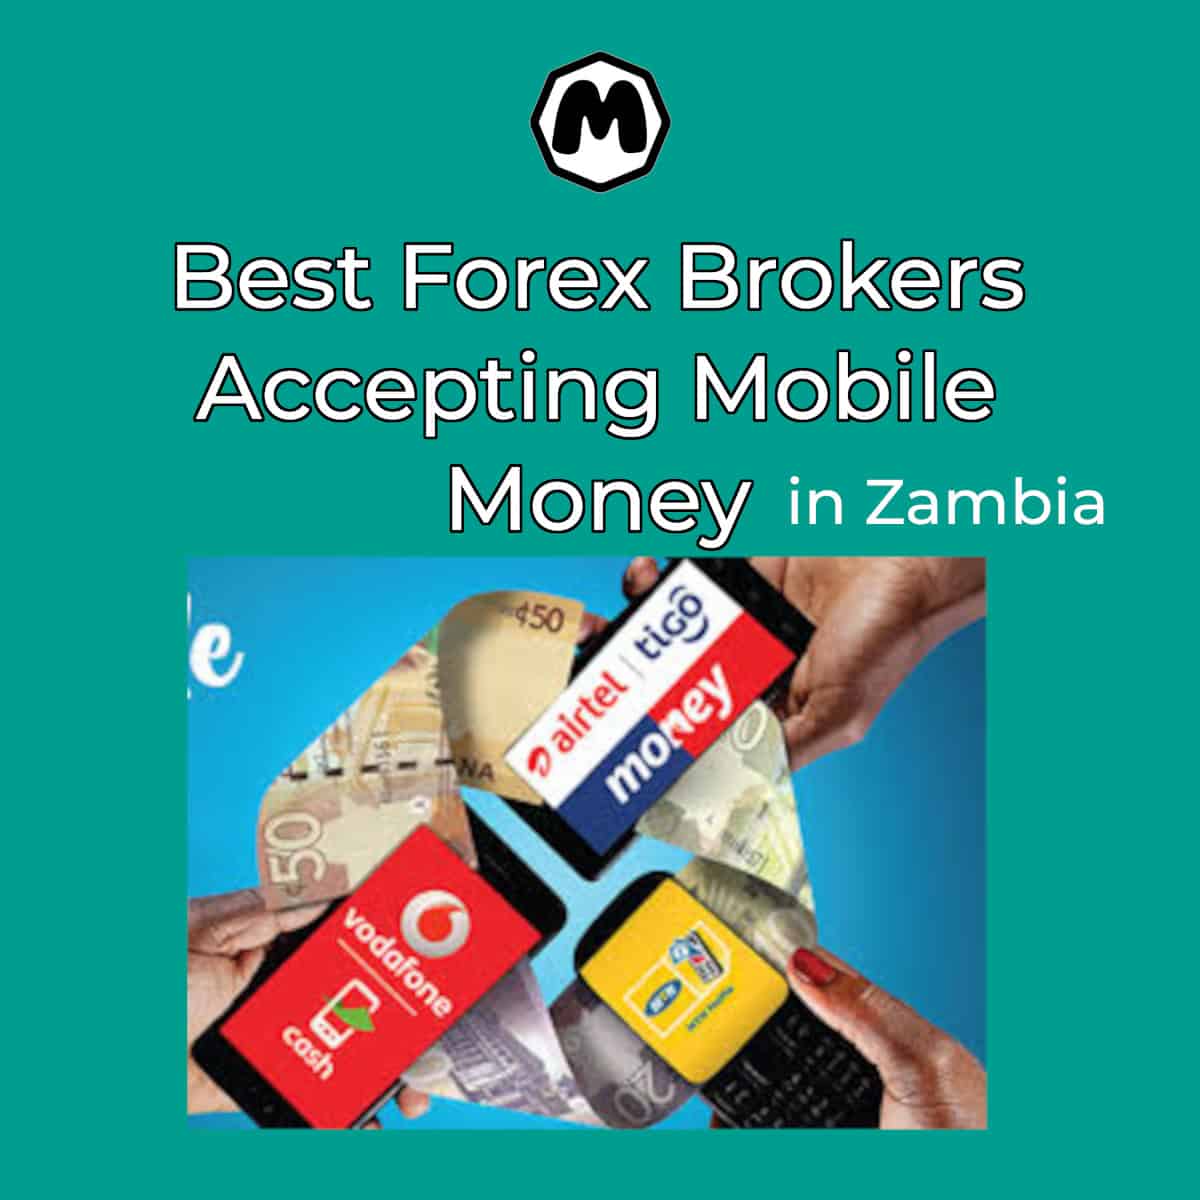 Best Forex Brokers Accepting Mobile Money in Zambia